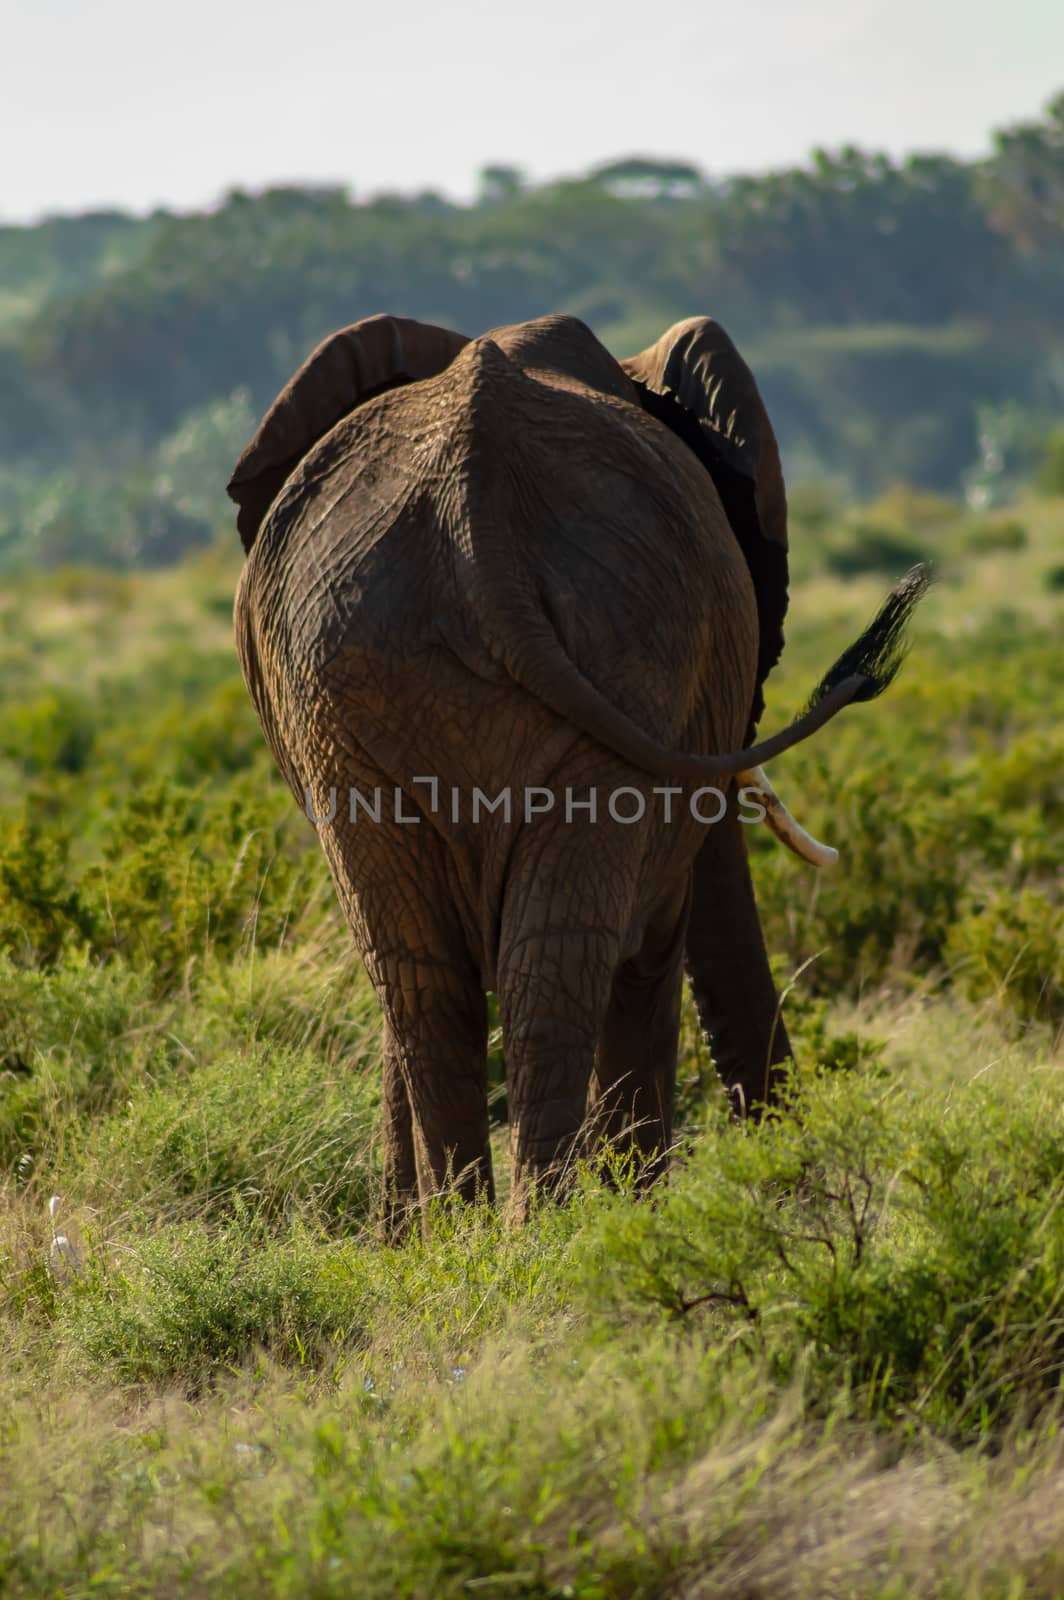 Elephant from behind. An African bush by Philou1000